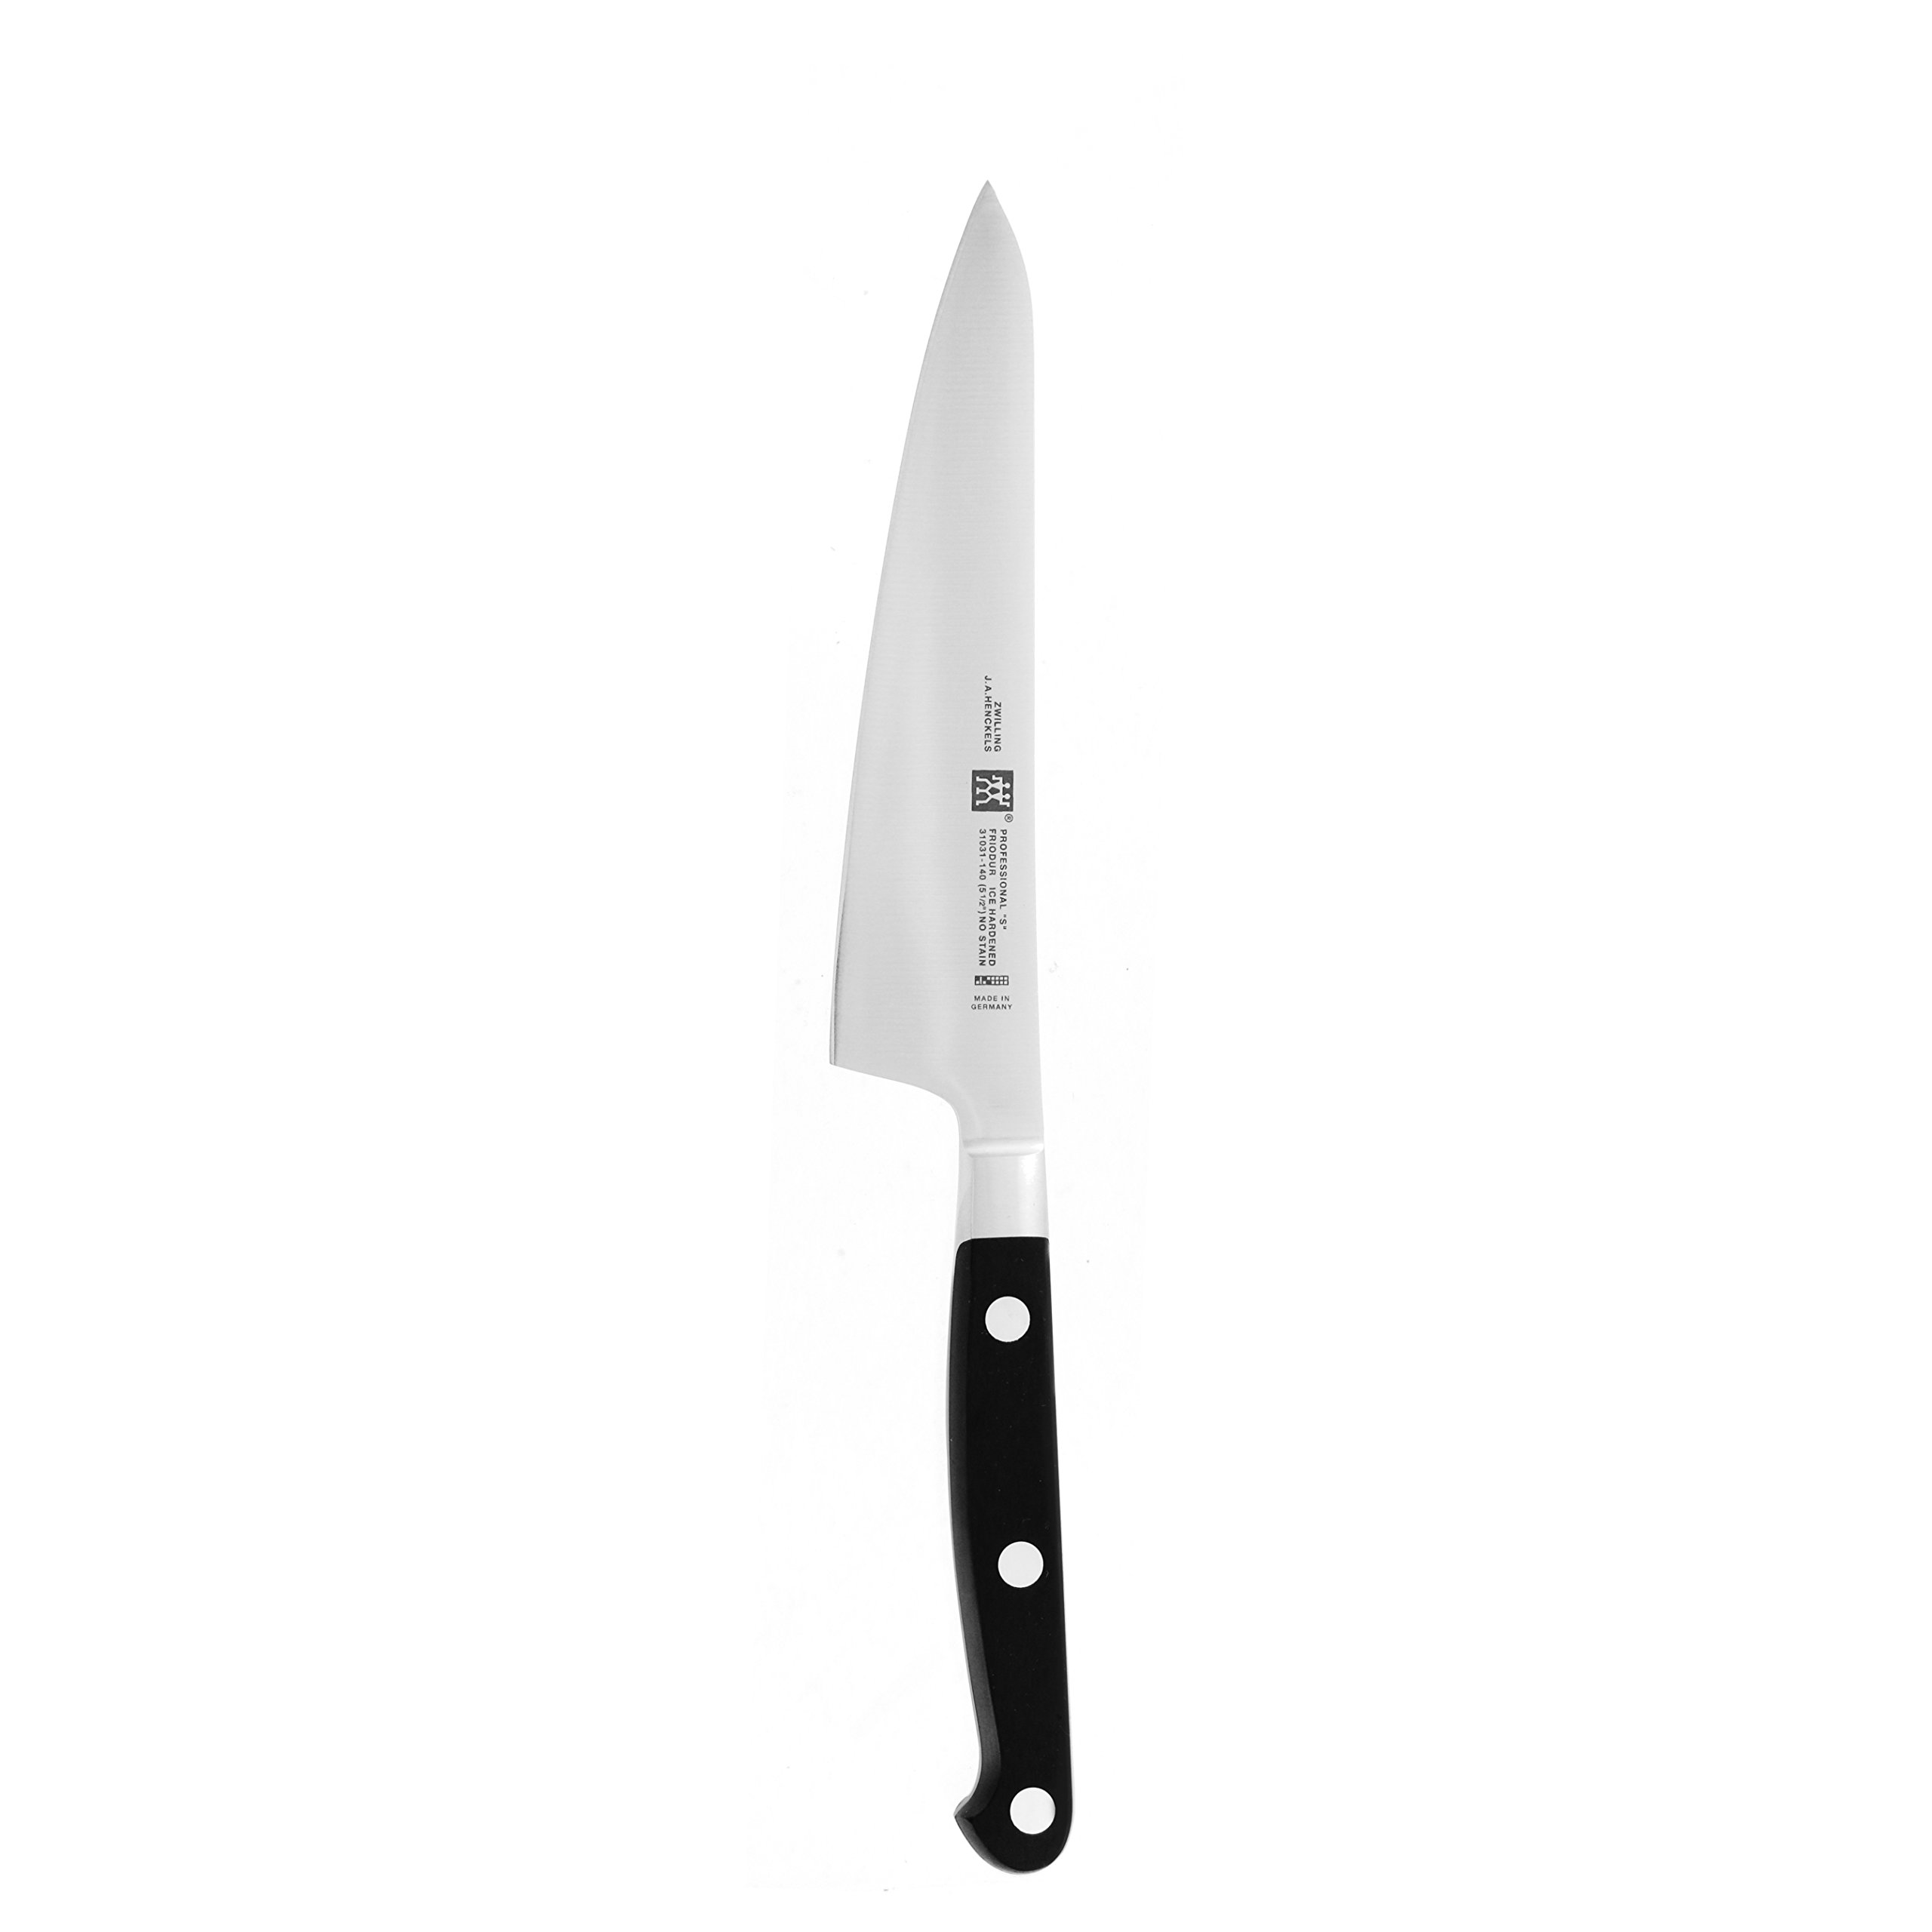 ZWILLING Professional S 5.5-inch Razor-Sharp German Prep Knife, Made in Company-Owned German Factory with Special Formula Steel perfected for almost 300 Years, Dishwasher Safe